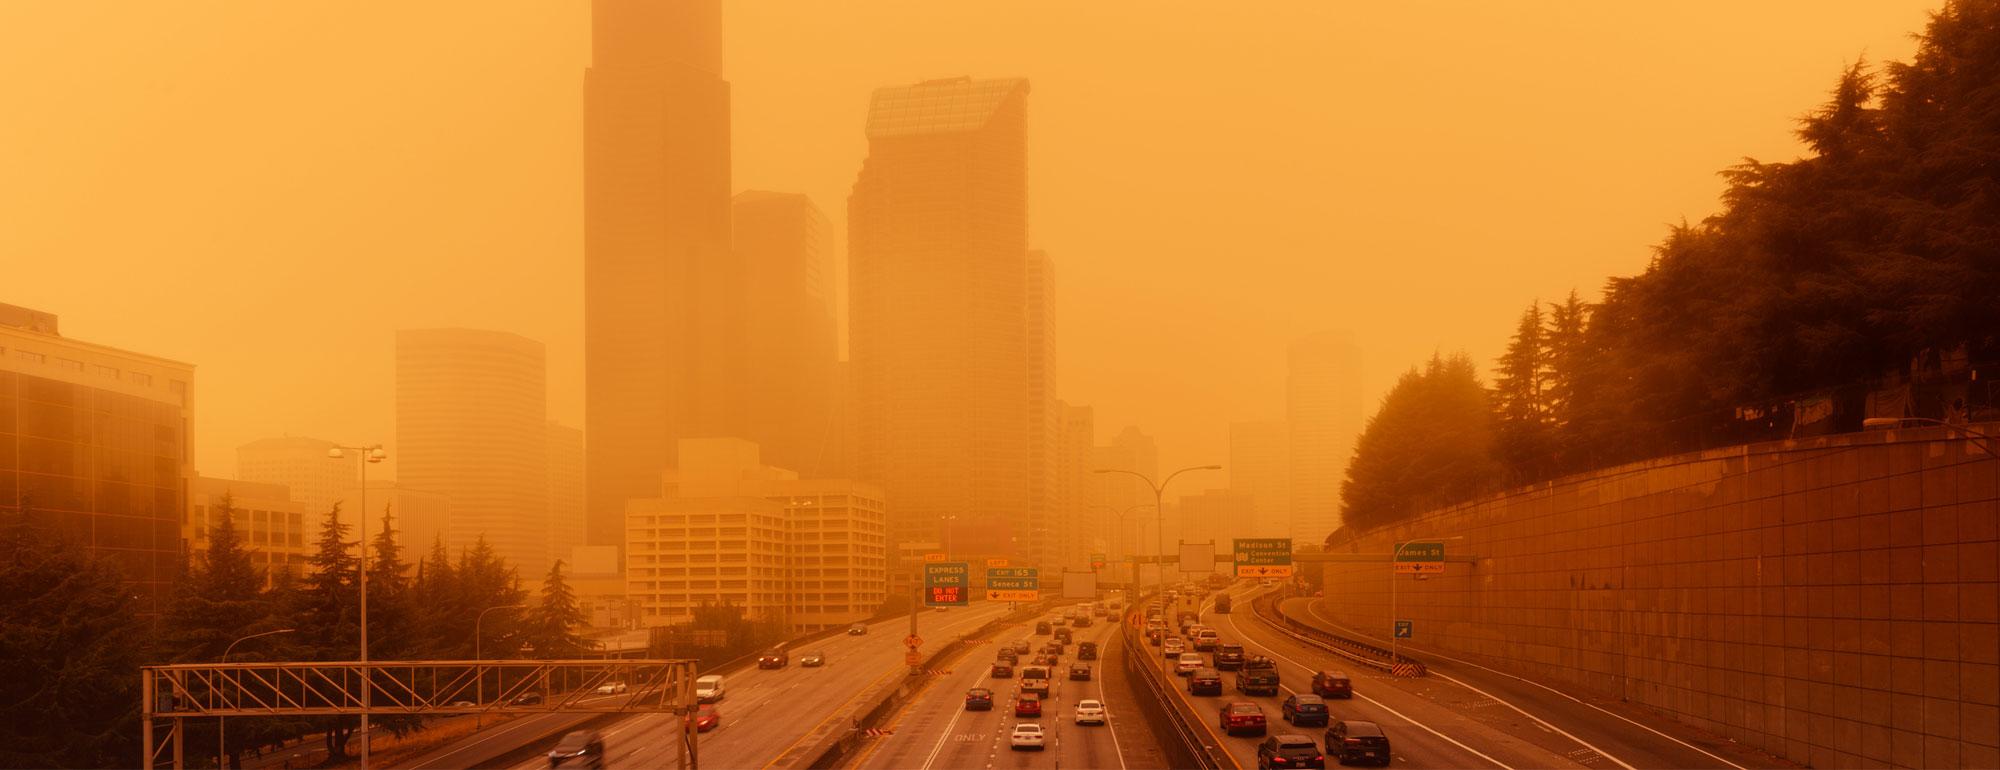 a polluted skyline with a freeway in the foreground